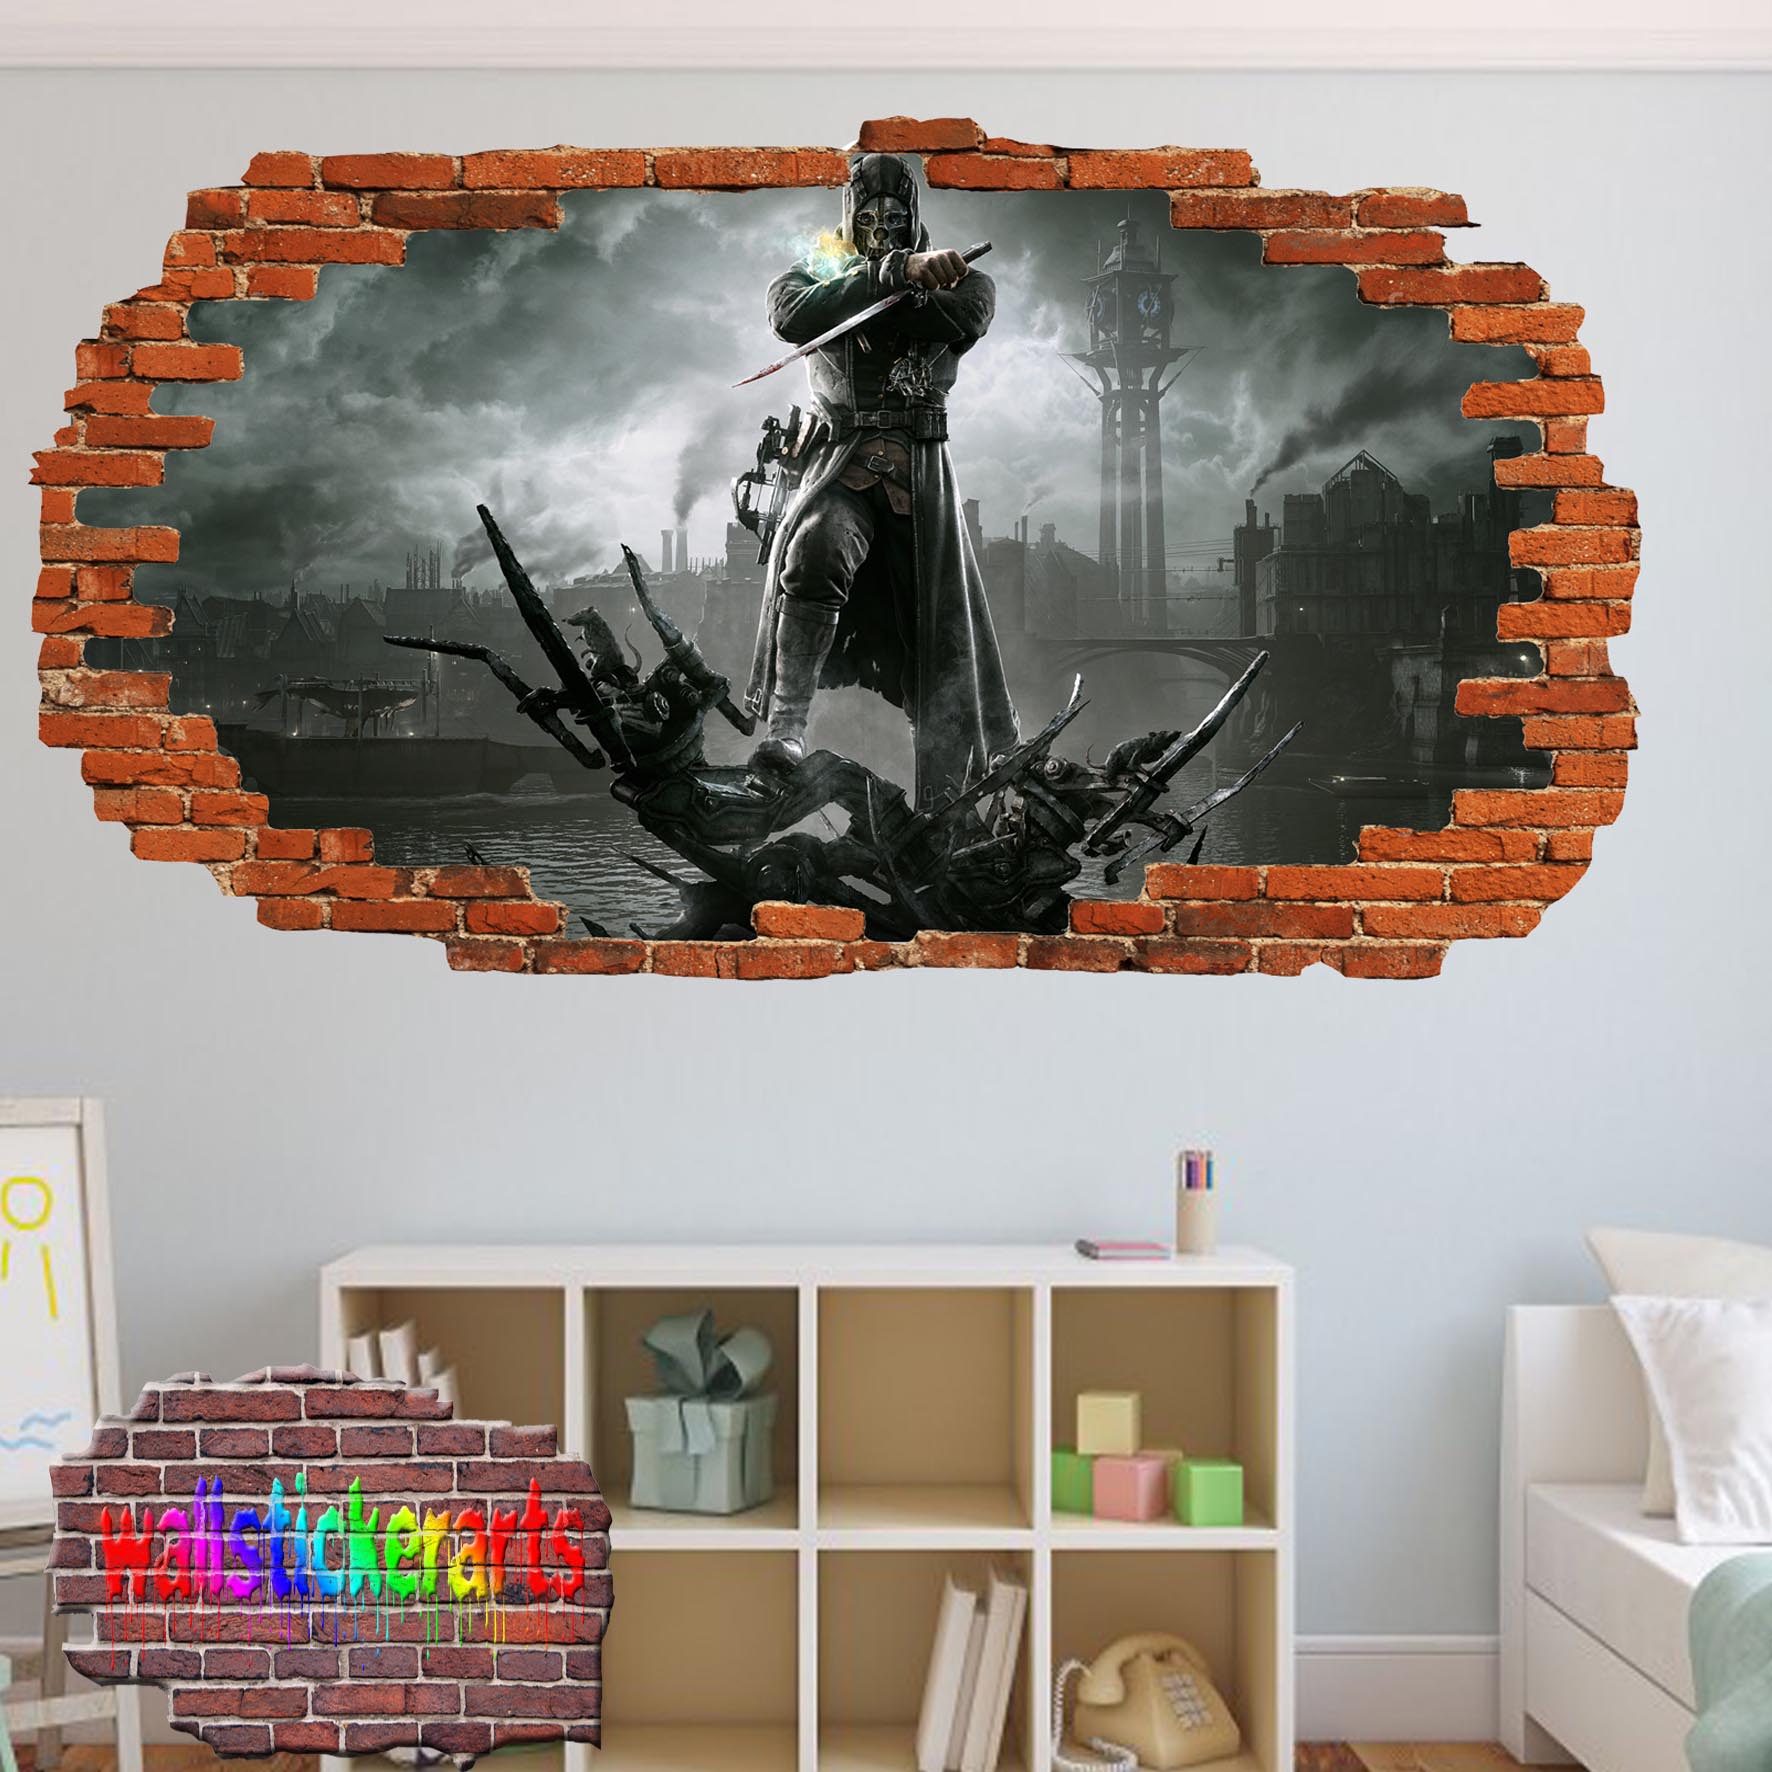 Dishonored 3d Smashed Wall Sticker Room Decoration Decal Mural